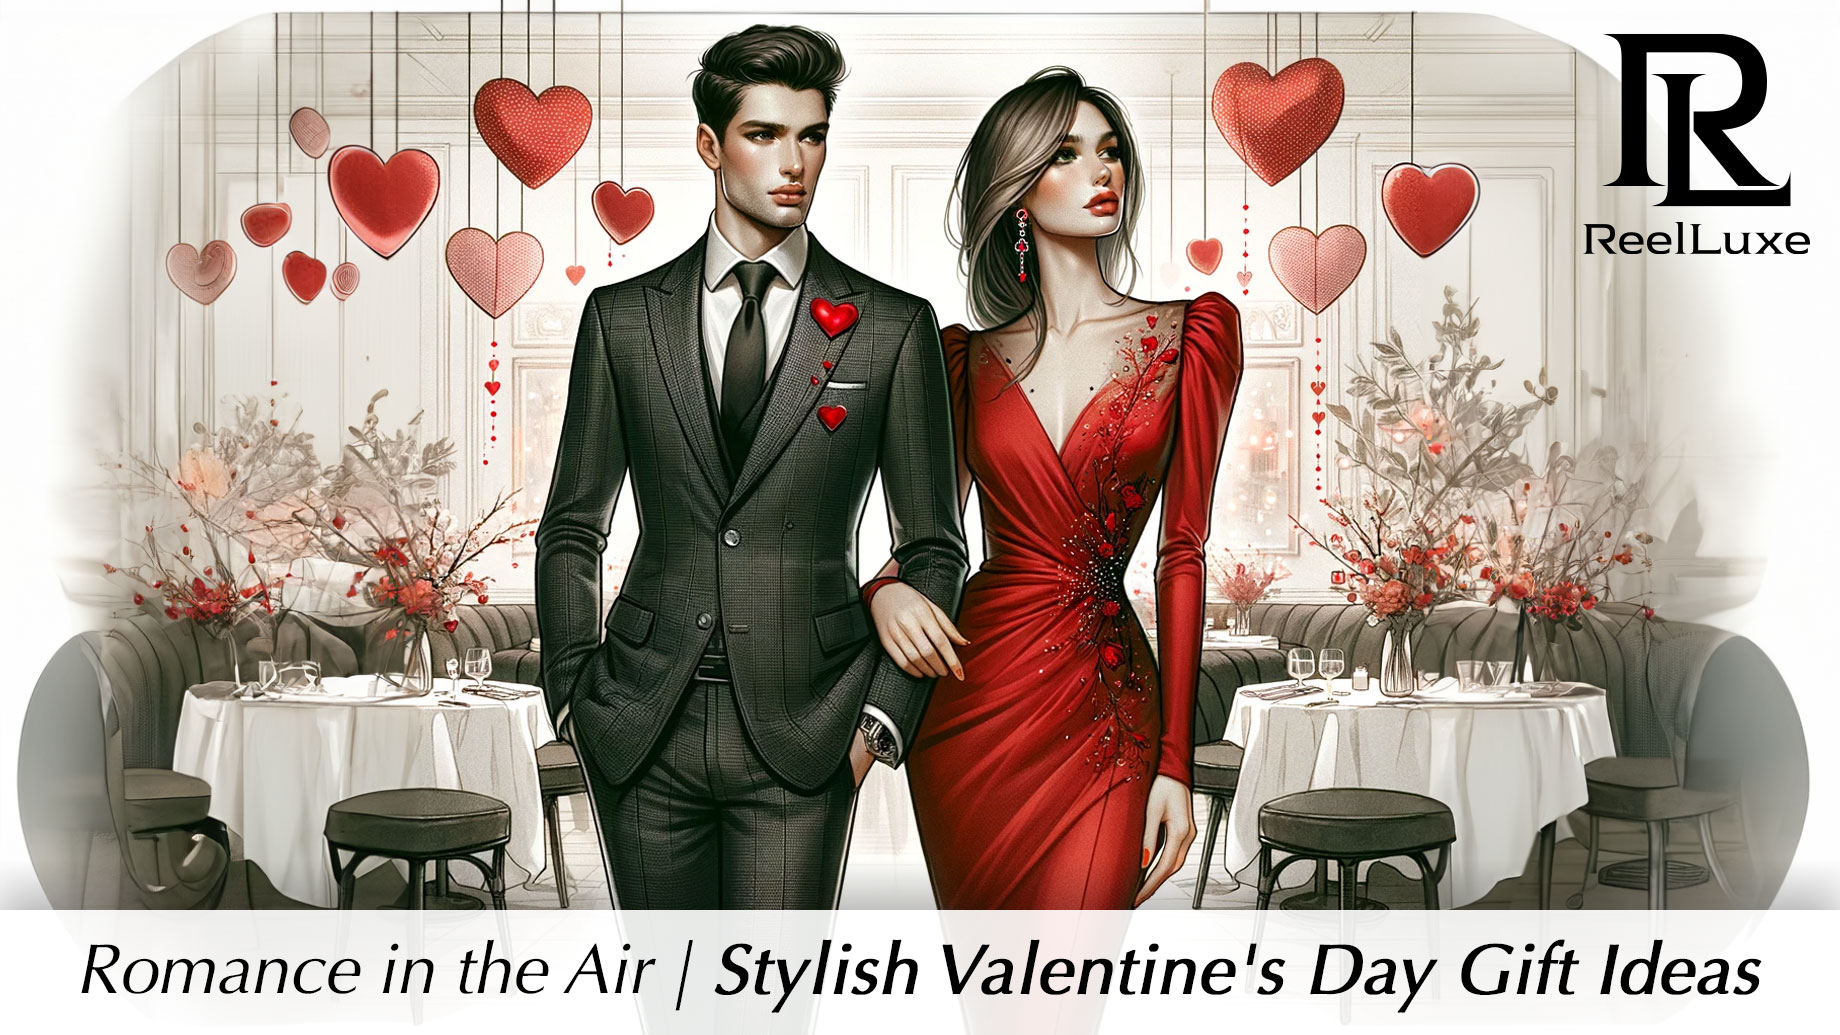 Romance in the Air: Stylish Valentine's Day Gift Ideas